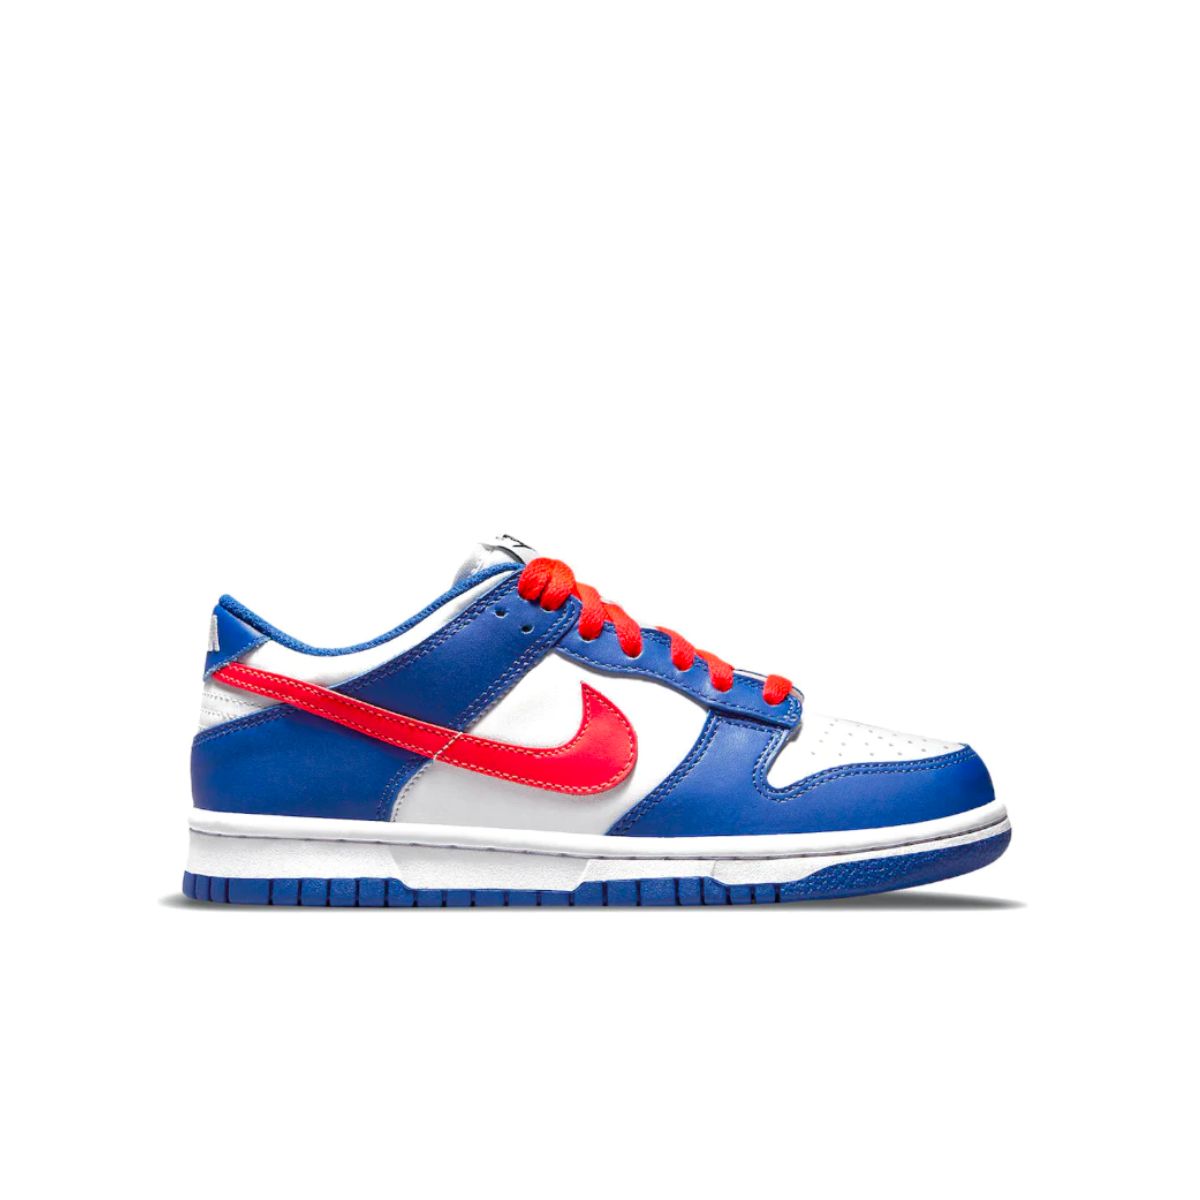 Red Nike Dunks Shoelace Replacements